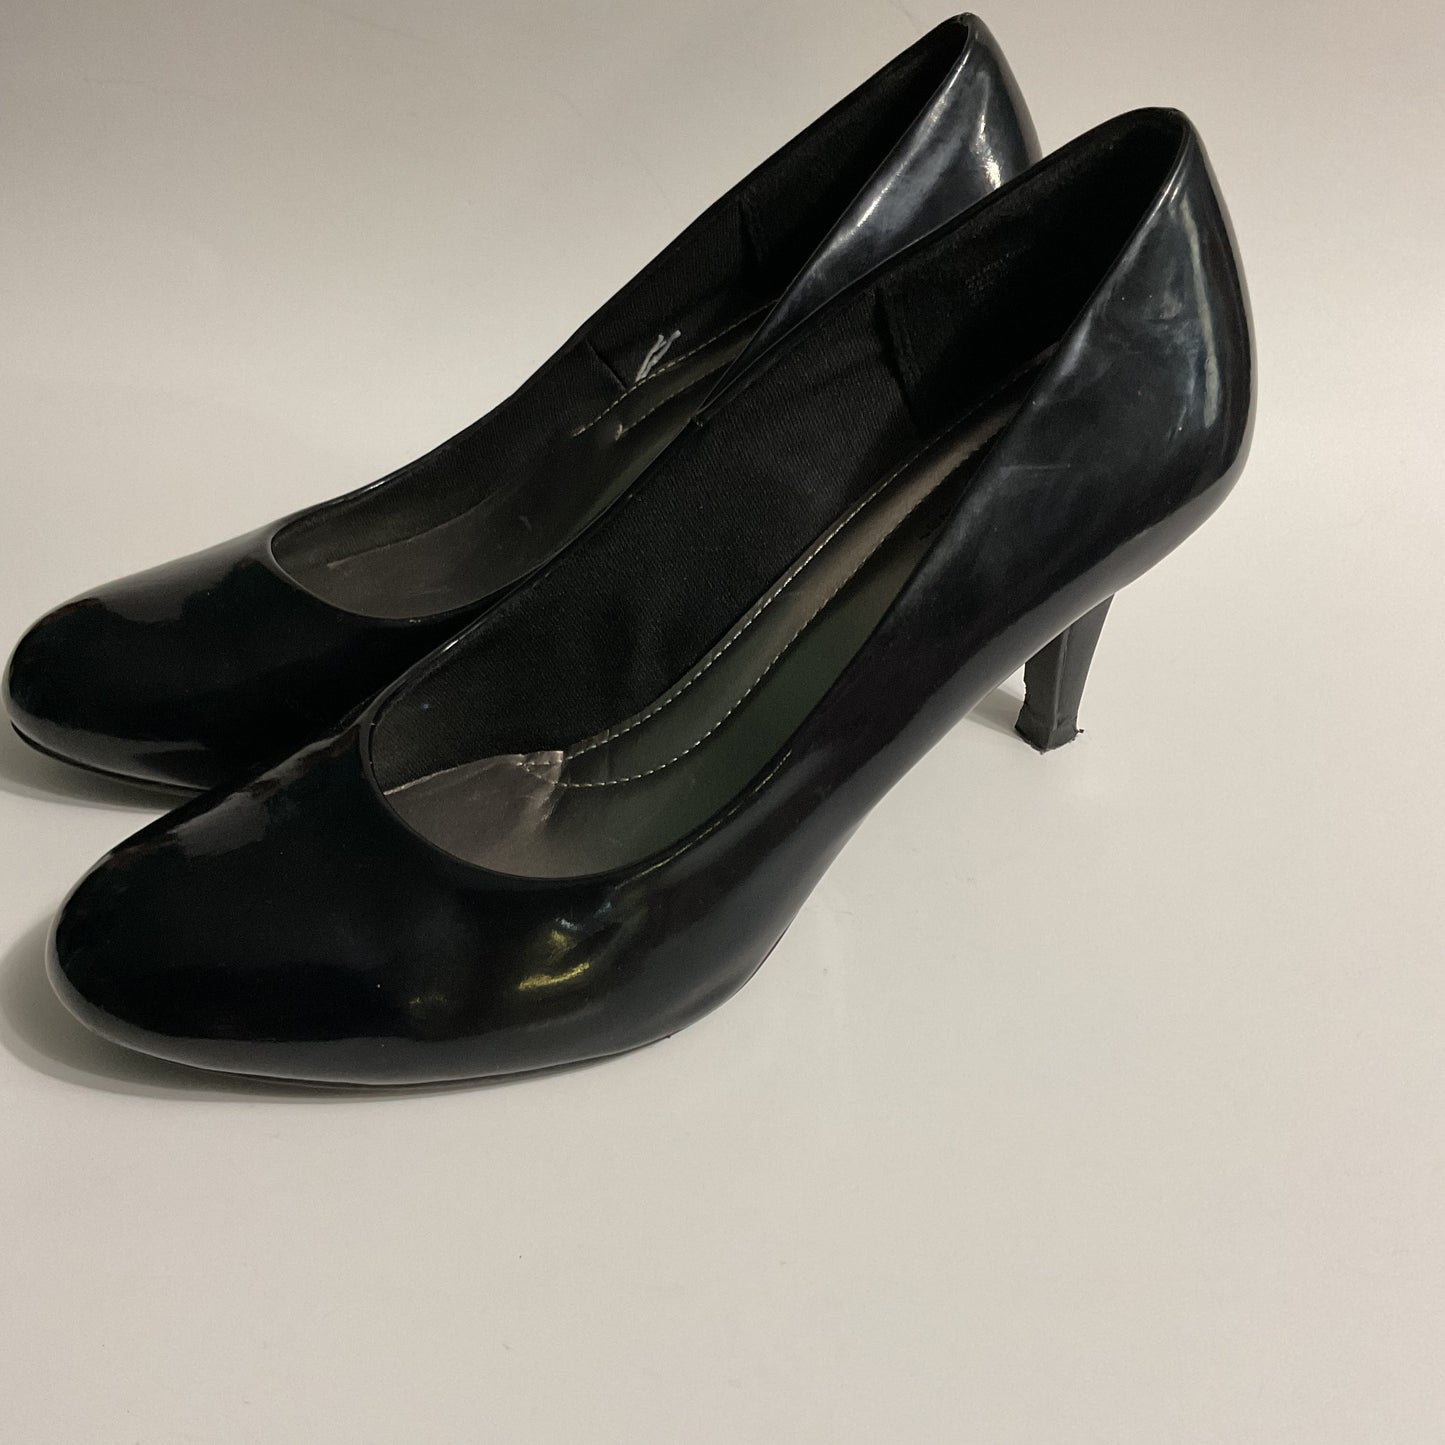 ComfortPlus Predictions Classic Office Round Tip Women’s Shoes Size 8